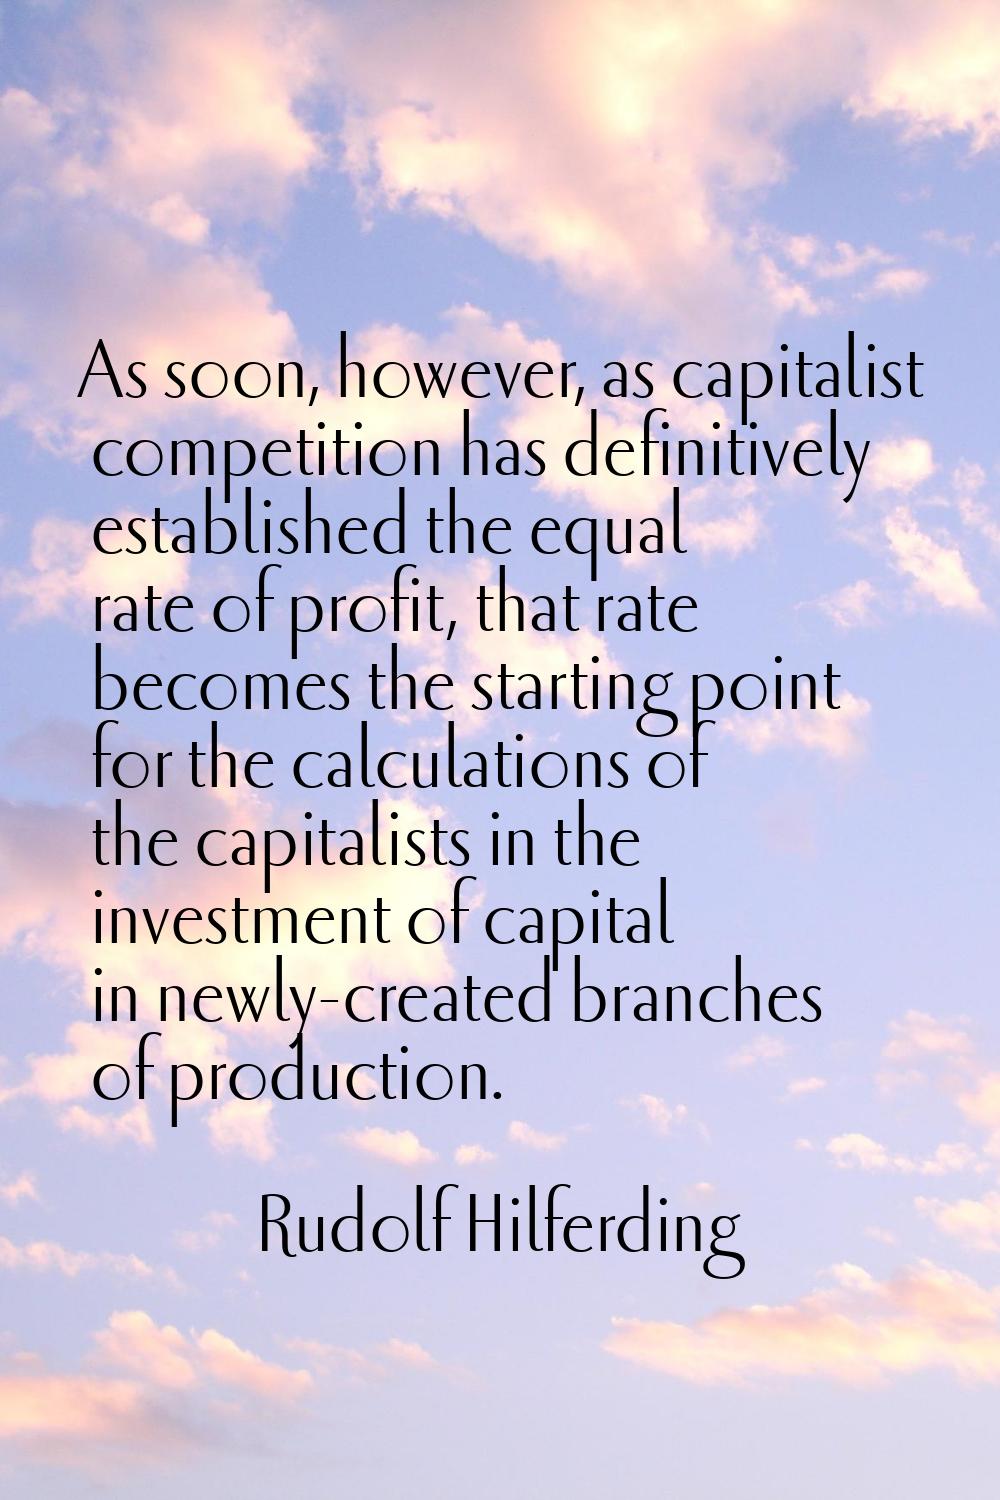 As soon, however, as capitalist competition has definitively established the equal rate of profit, 